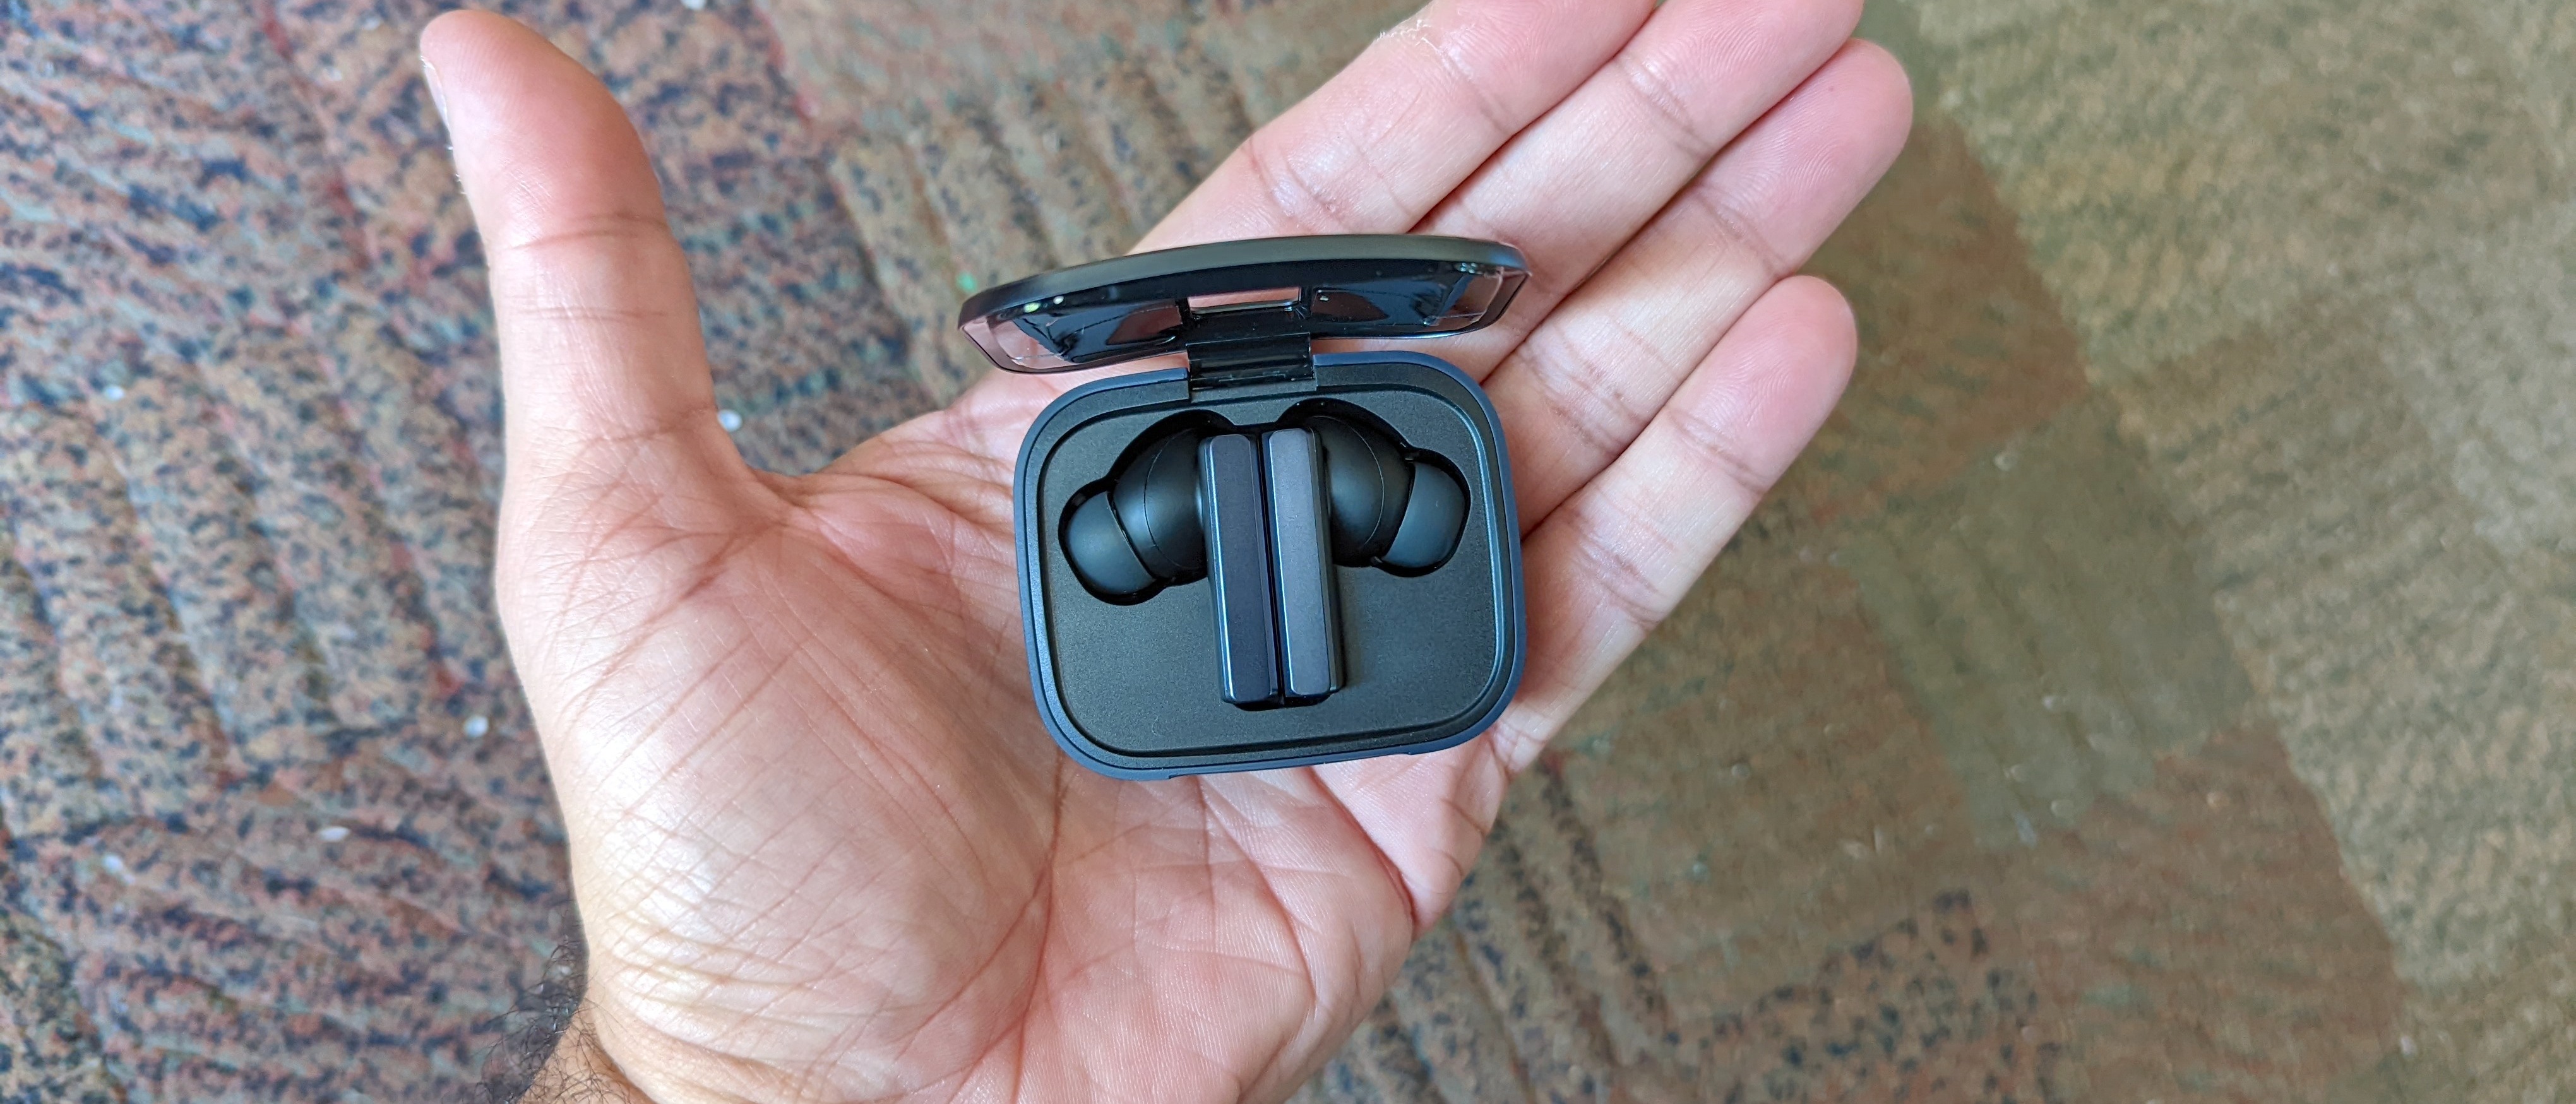 EarFun Air Pro SV Wireless Earbuds, QuietSmart™ 2.0 𝗔𝗰𝘁𝗶𝘃𝗲 𝗡𝗼𝗶𝘀𝗲  𝗖𝗮𝗻𝗰𝗲𝗹𝗹𝗶𝗻𝗴 𝗘𝗮𝗿𝗯𝘂𝗱𝘀 with 6 Mics, Bluetooth 5.2 Earbuds,  Wireless Charging, Low